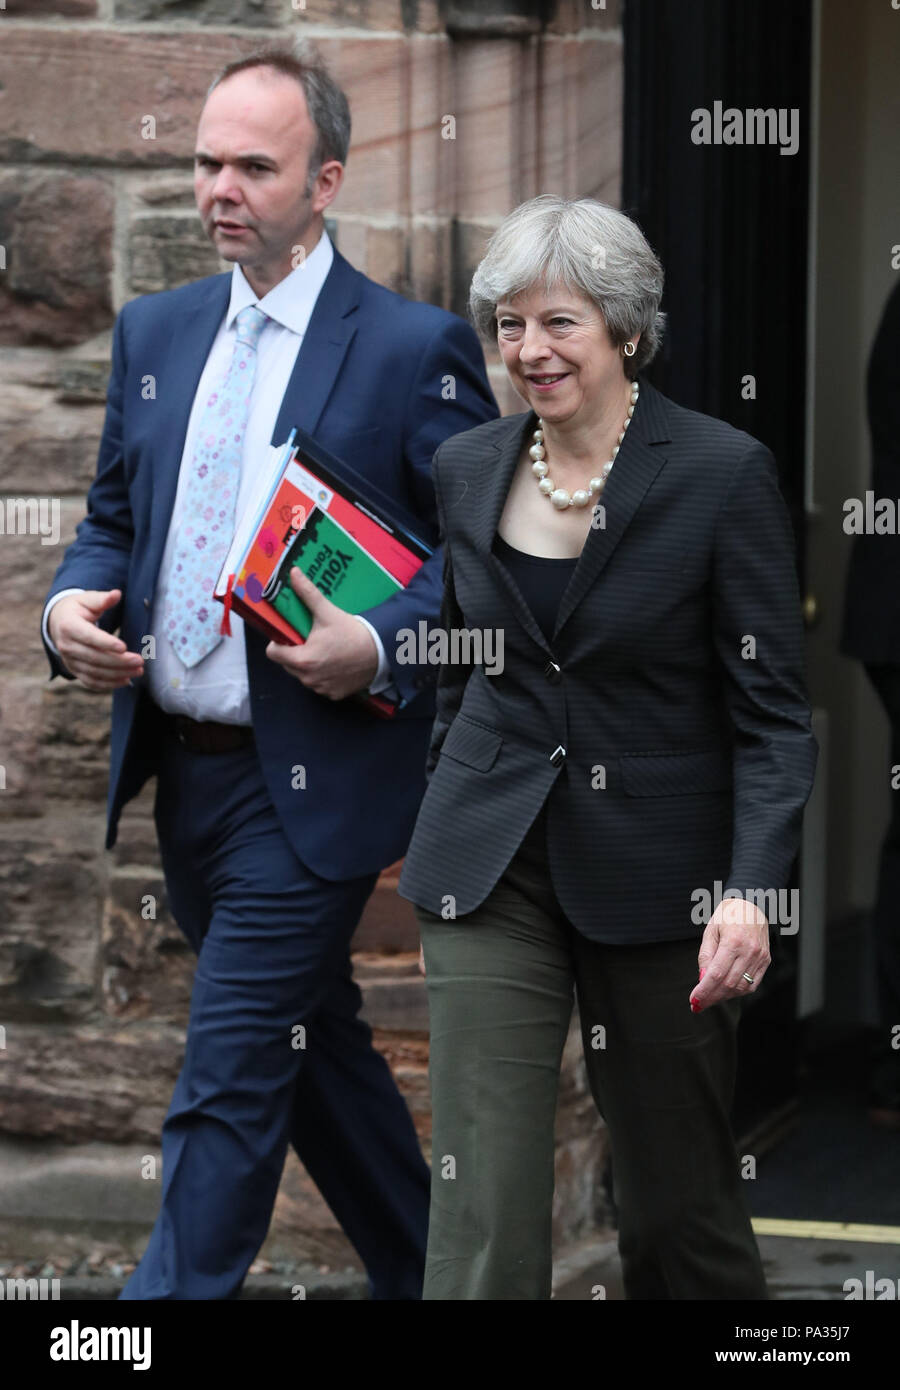 Prime Minister Theresa May leaving Crescent Arts Centre in Belfast after giving a speech where she will reiterate her refusal to contemplate any backstop deal that treats Northern Ireland differently from the rest of the UK. Stock Photo